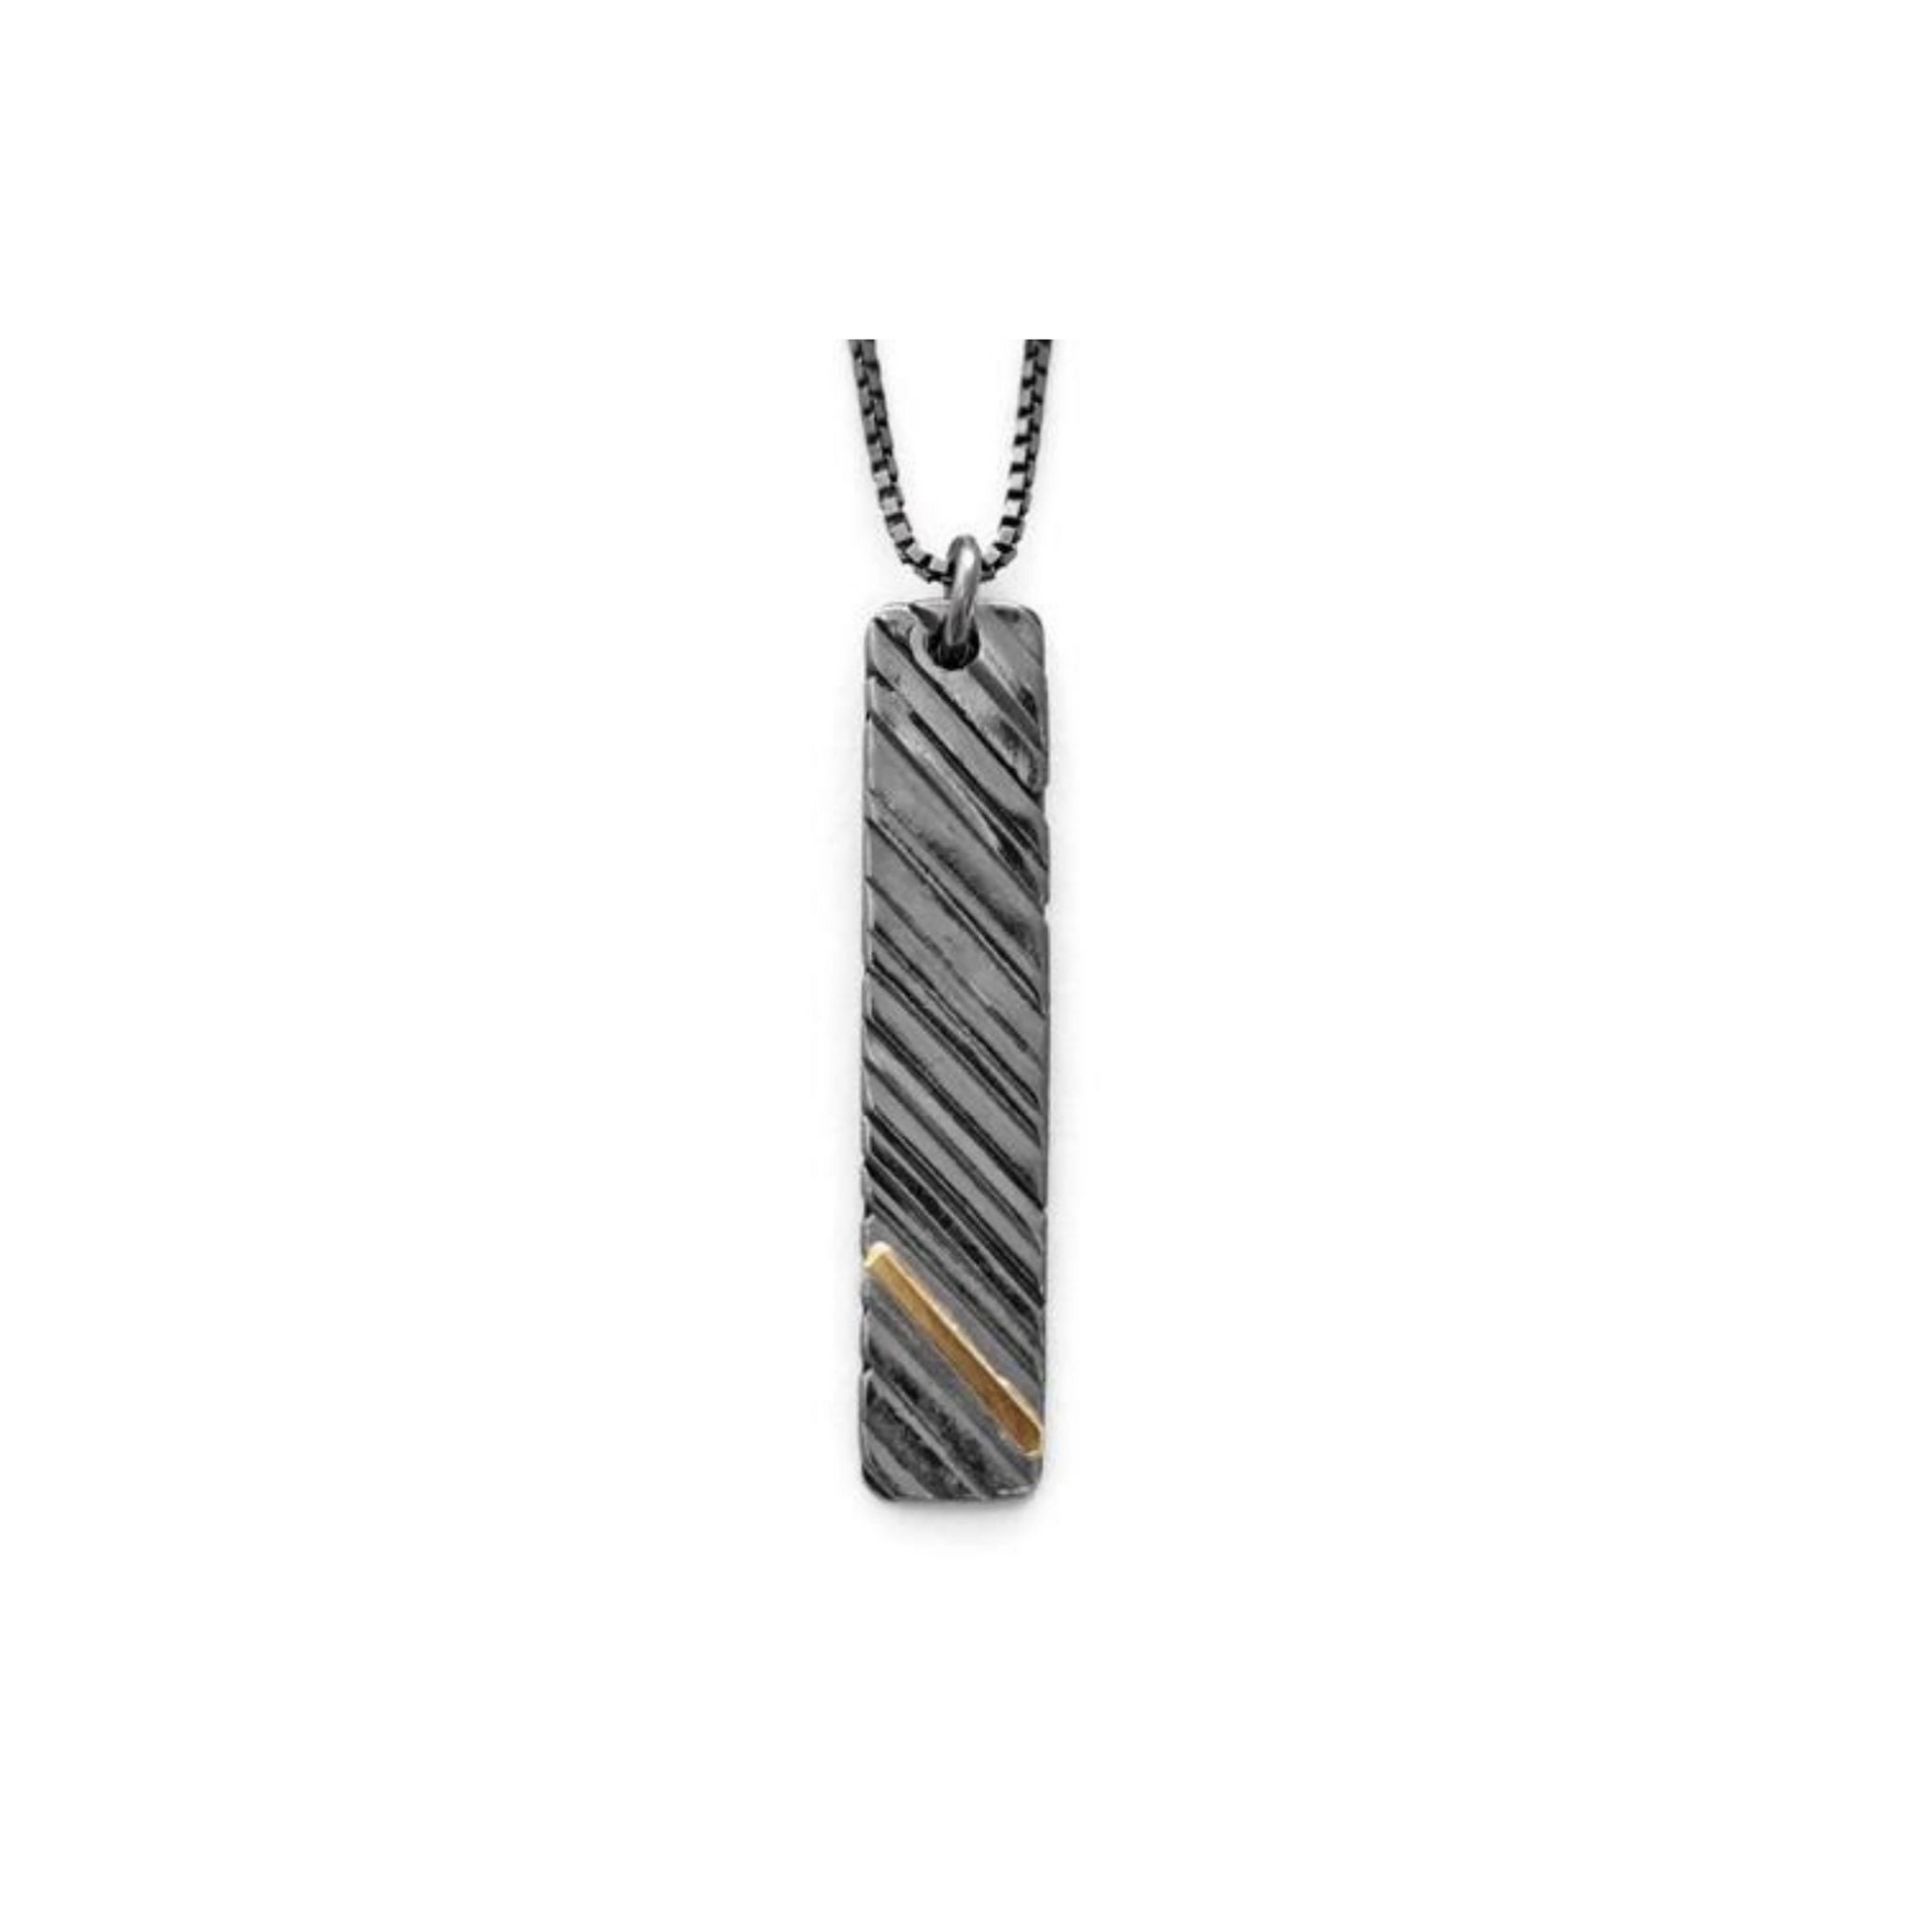 Bar necklace in silver and gold oxidized